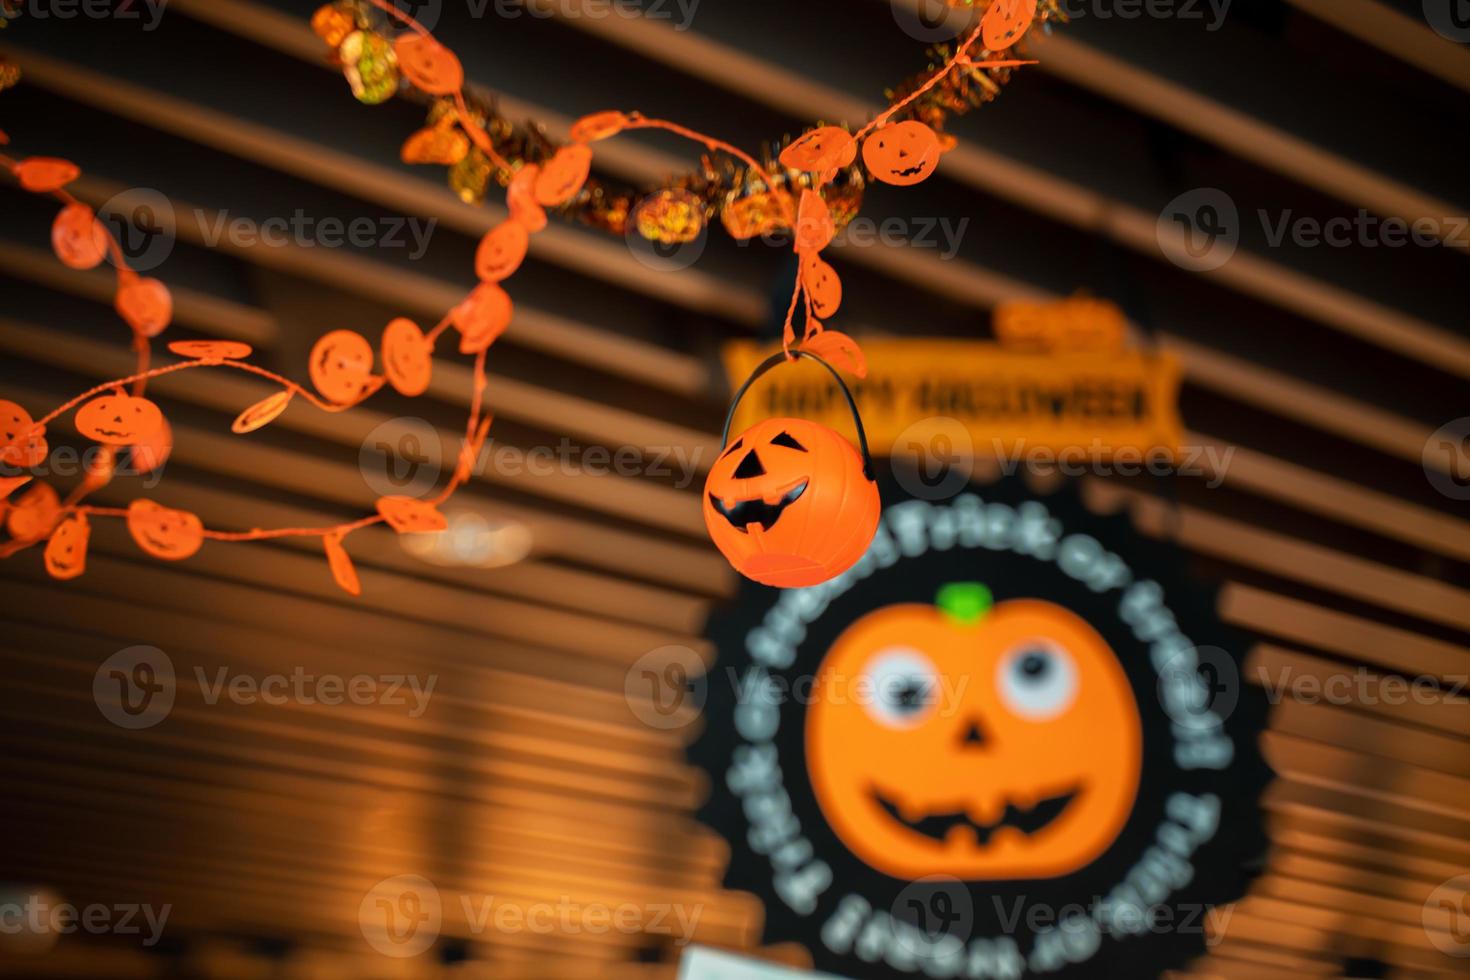 Festive Halloween cartoon decoration hanging on the ceiling of room interior, close up. photo